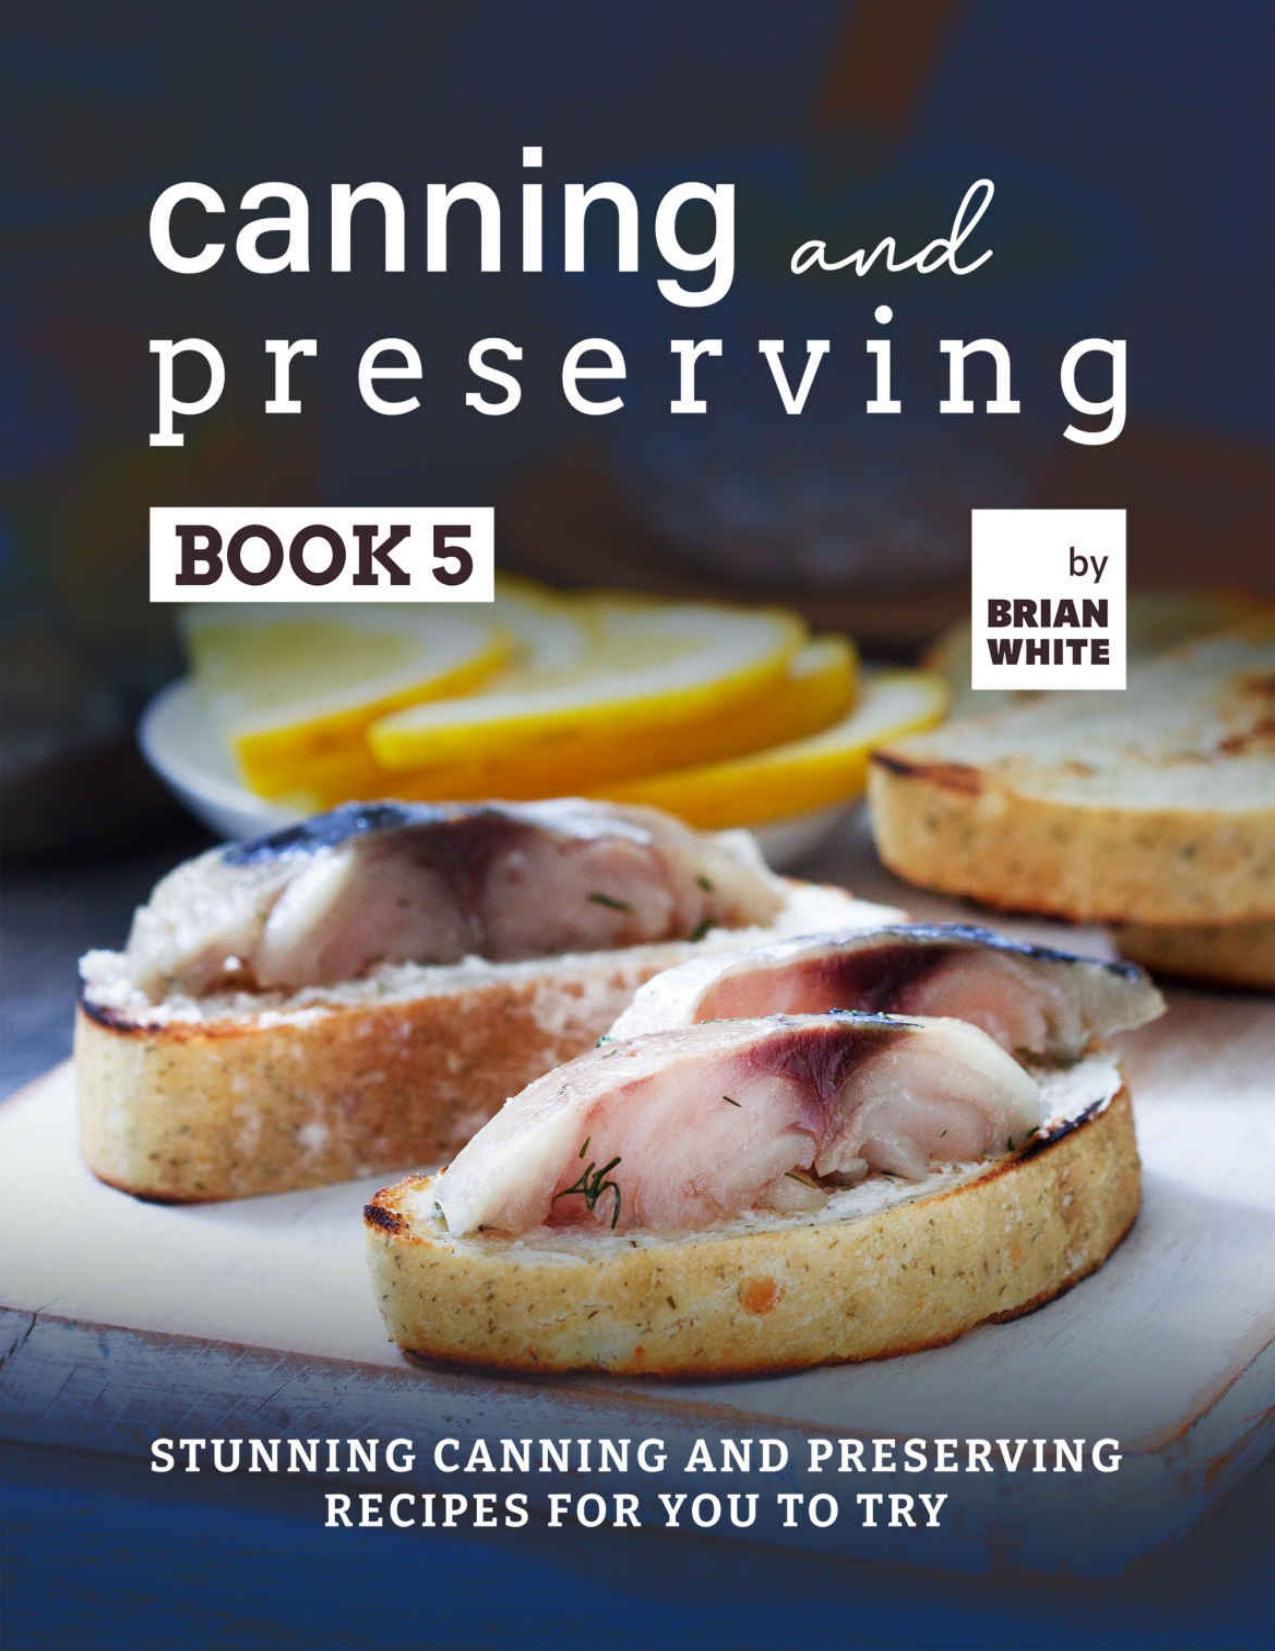 Canning and Preserving Book 5: Stunning Canning and Preserving Recipes for You to Try by White Brian